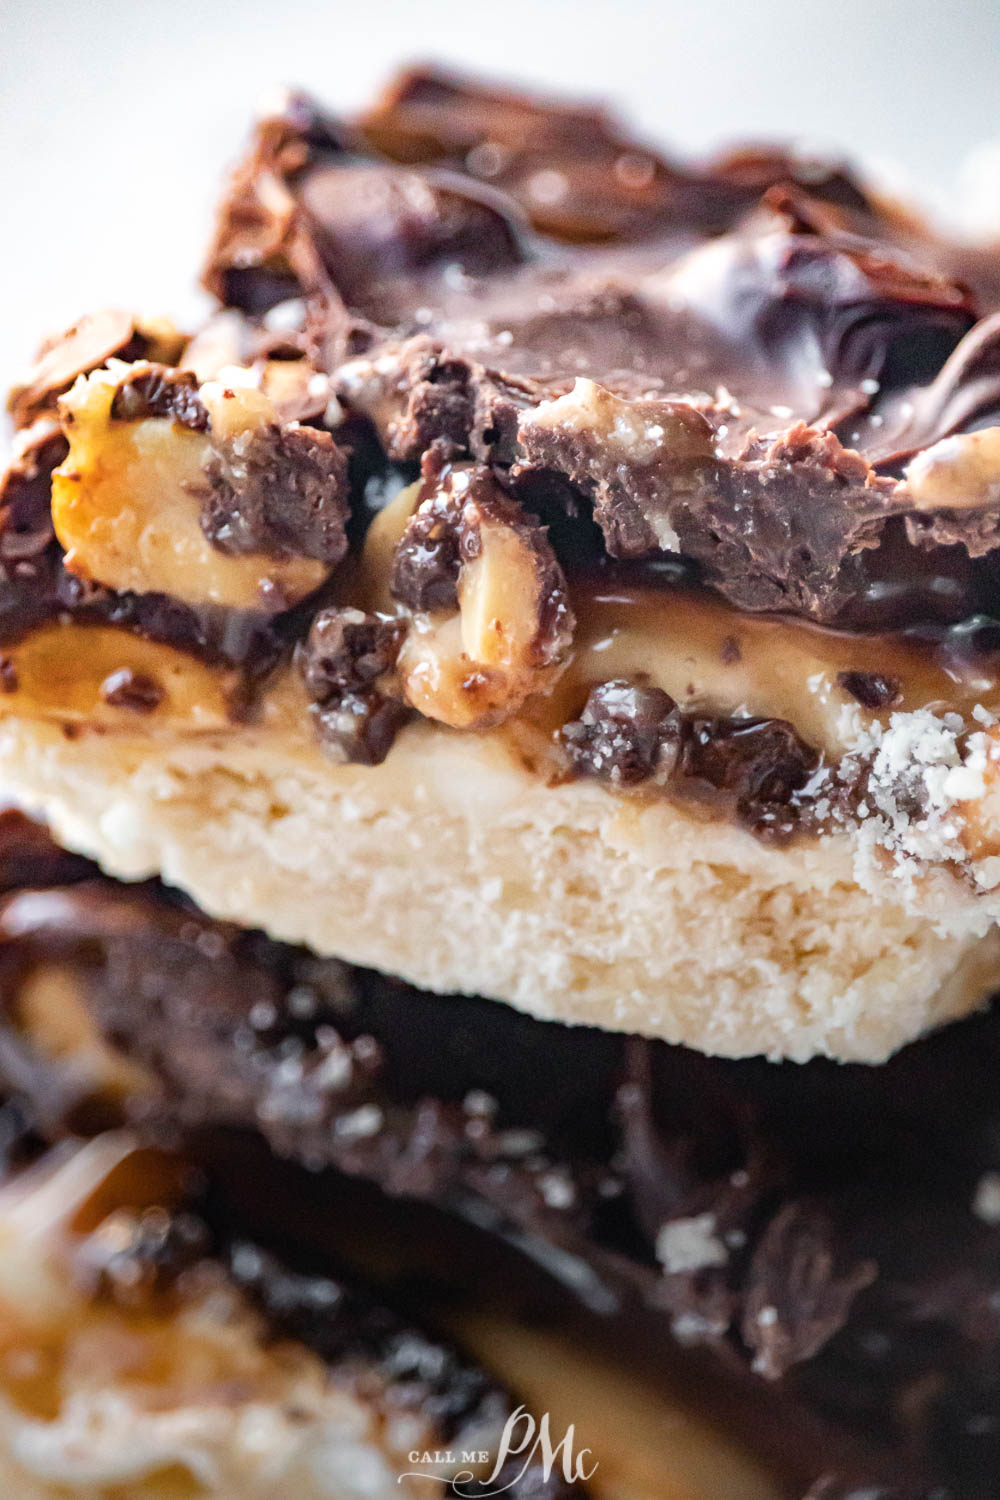 homemade Snickers candy bars, close up.